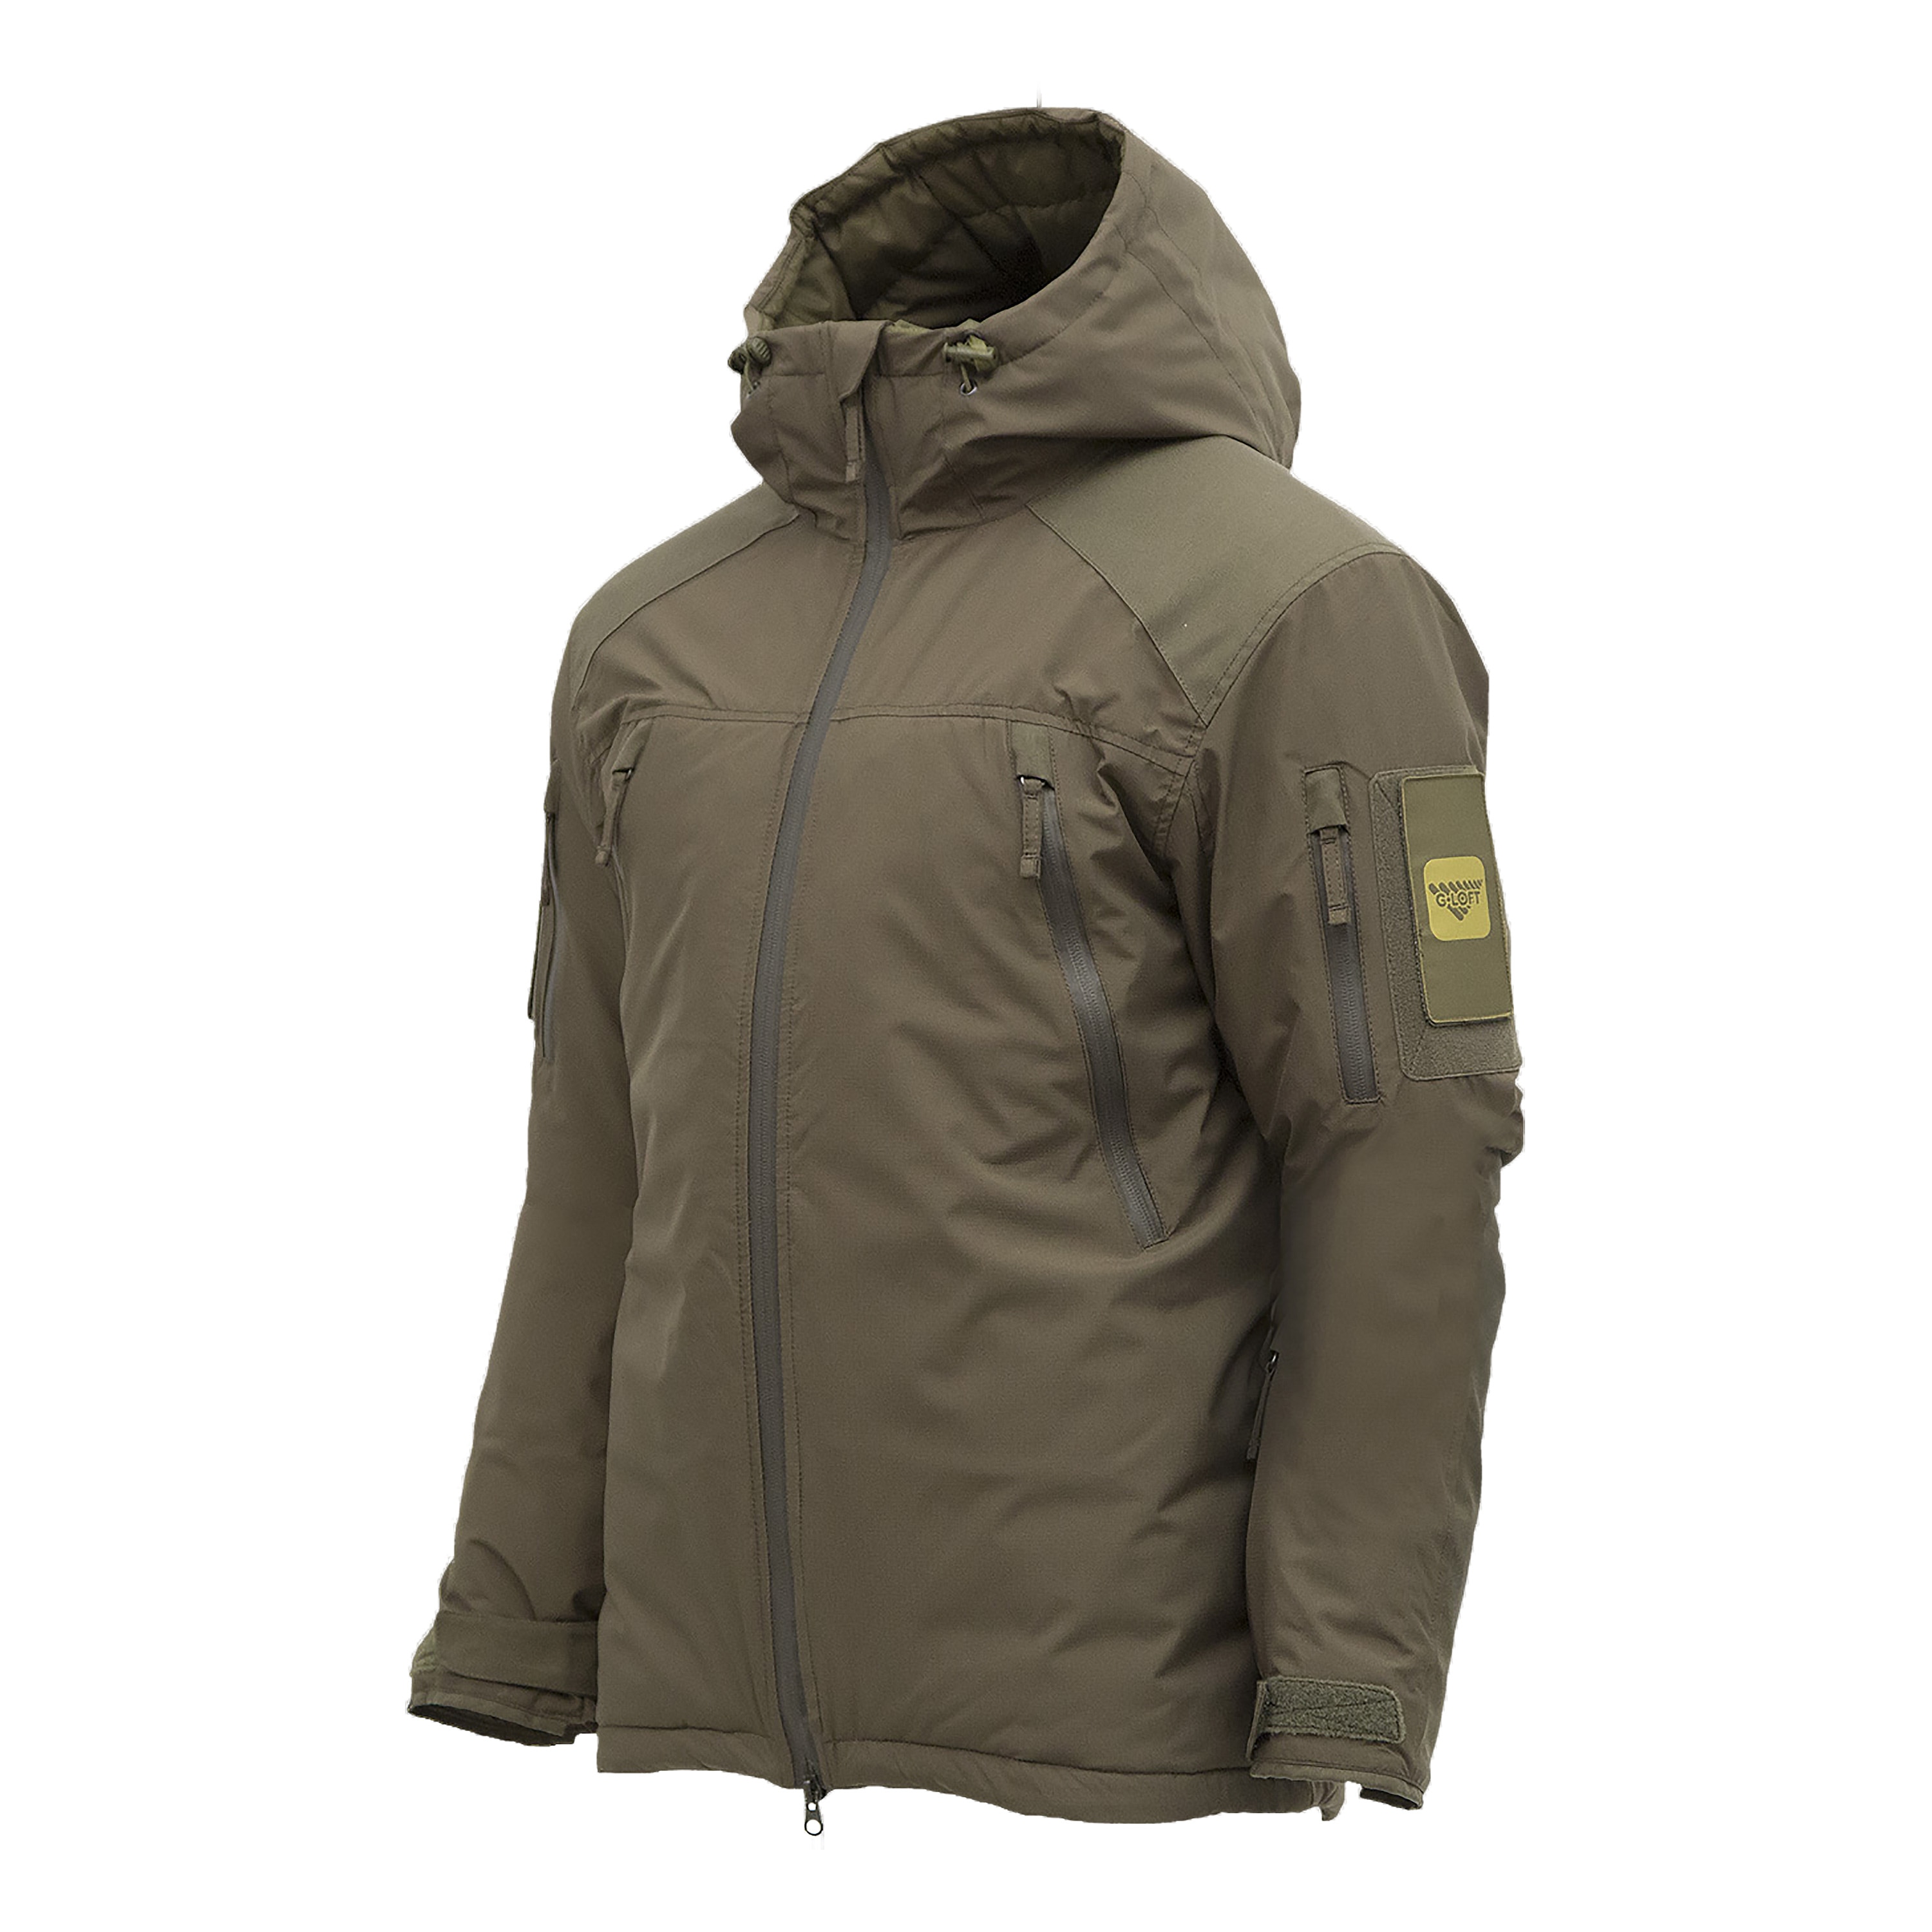 Purchase the Carinthia Jacket MIG 3.0 olive by ASMC